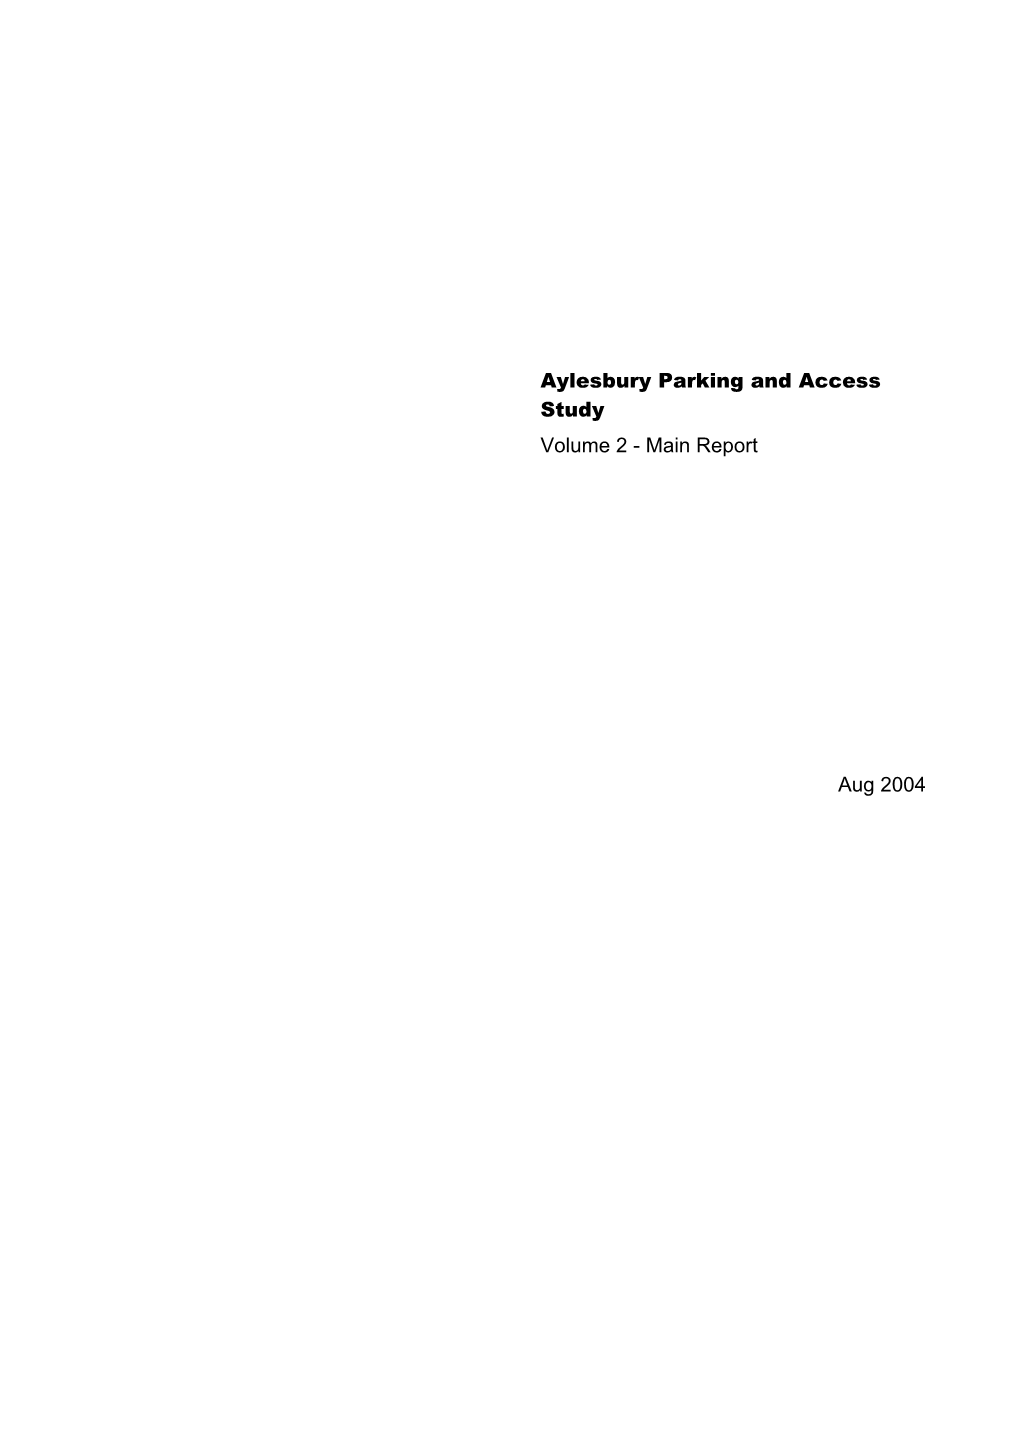 Aylesbury Parking and Access Study Volume 2 - Main Report